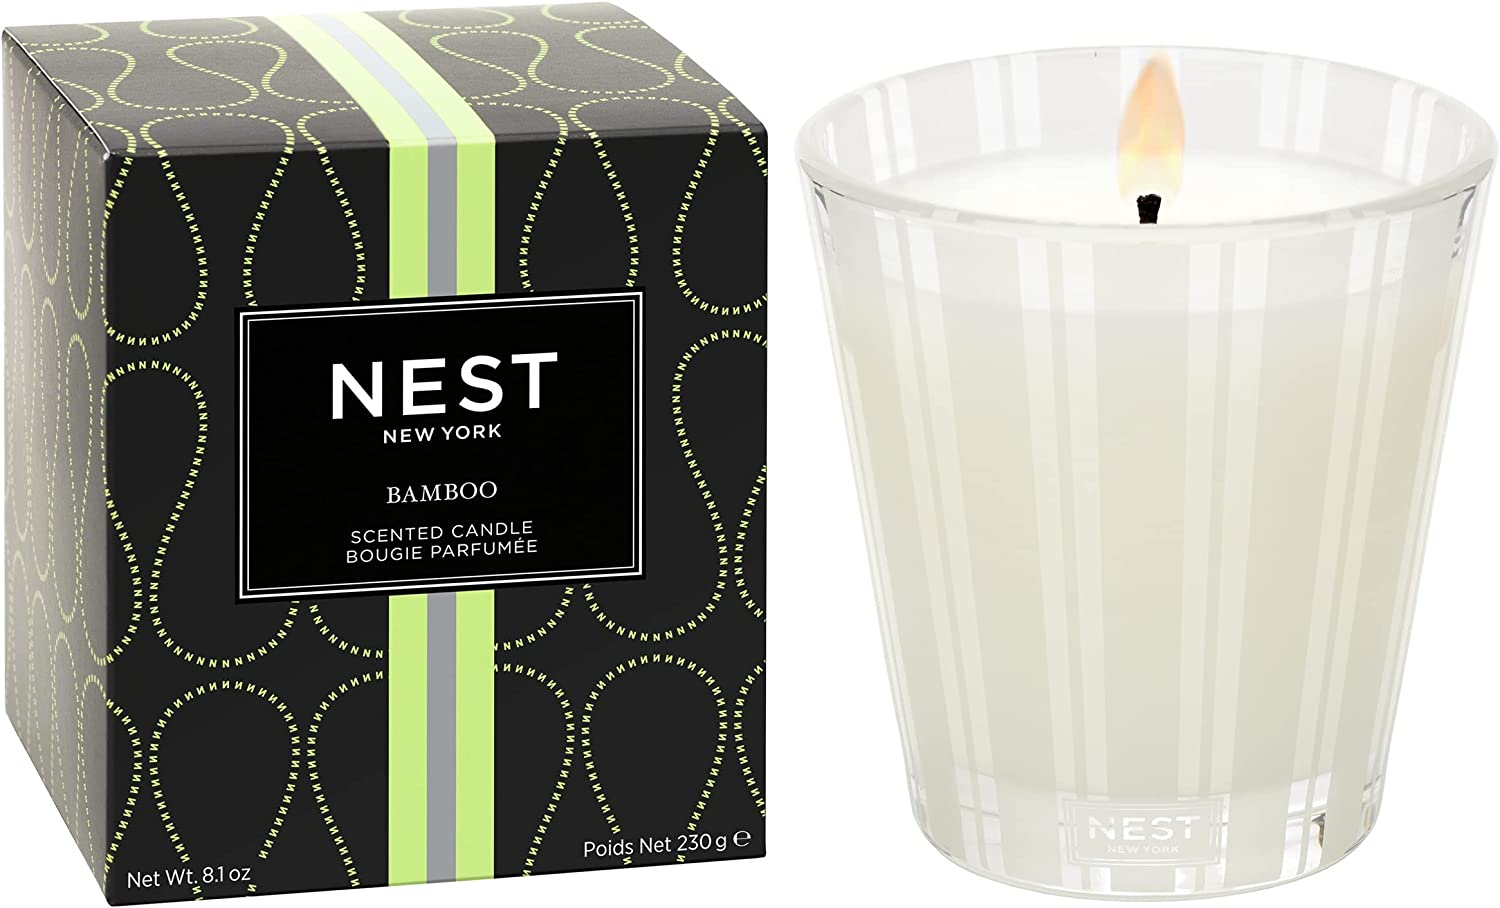 NEST Vegan Bamboo Scented Candle